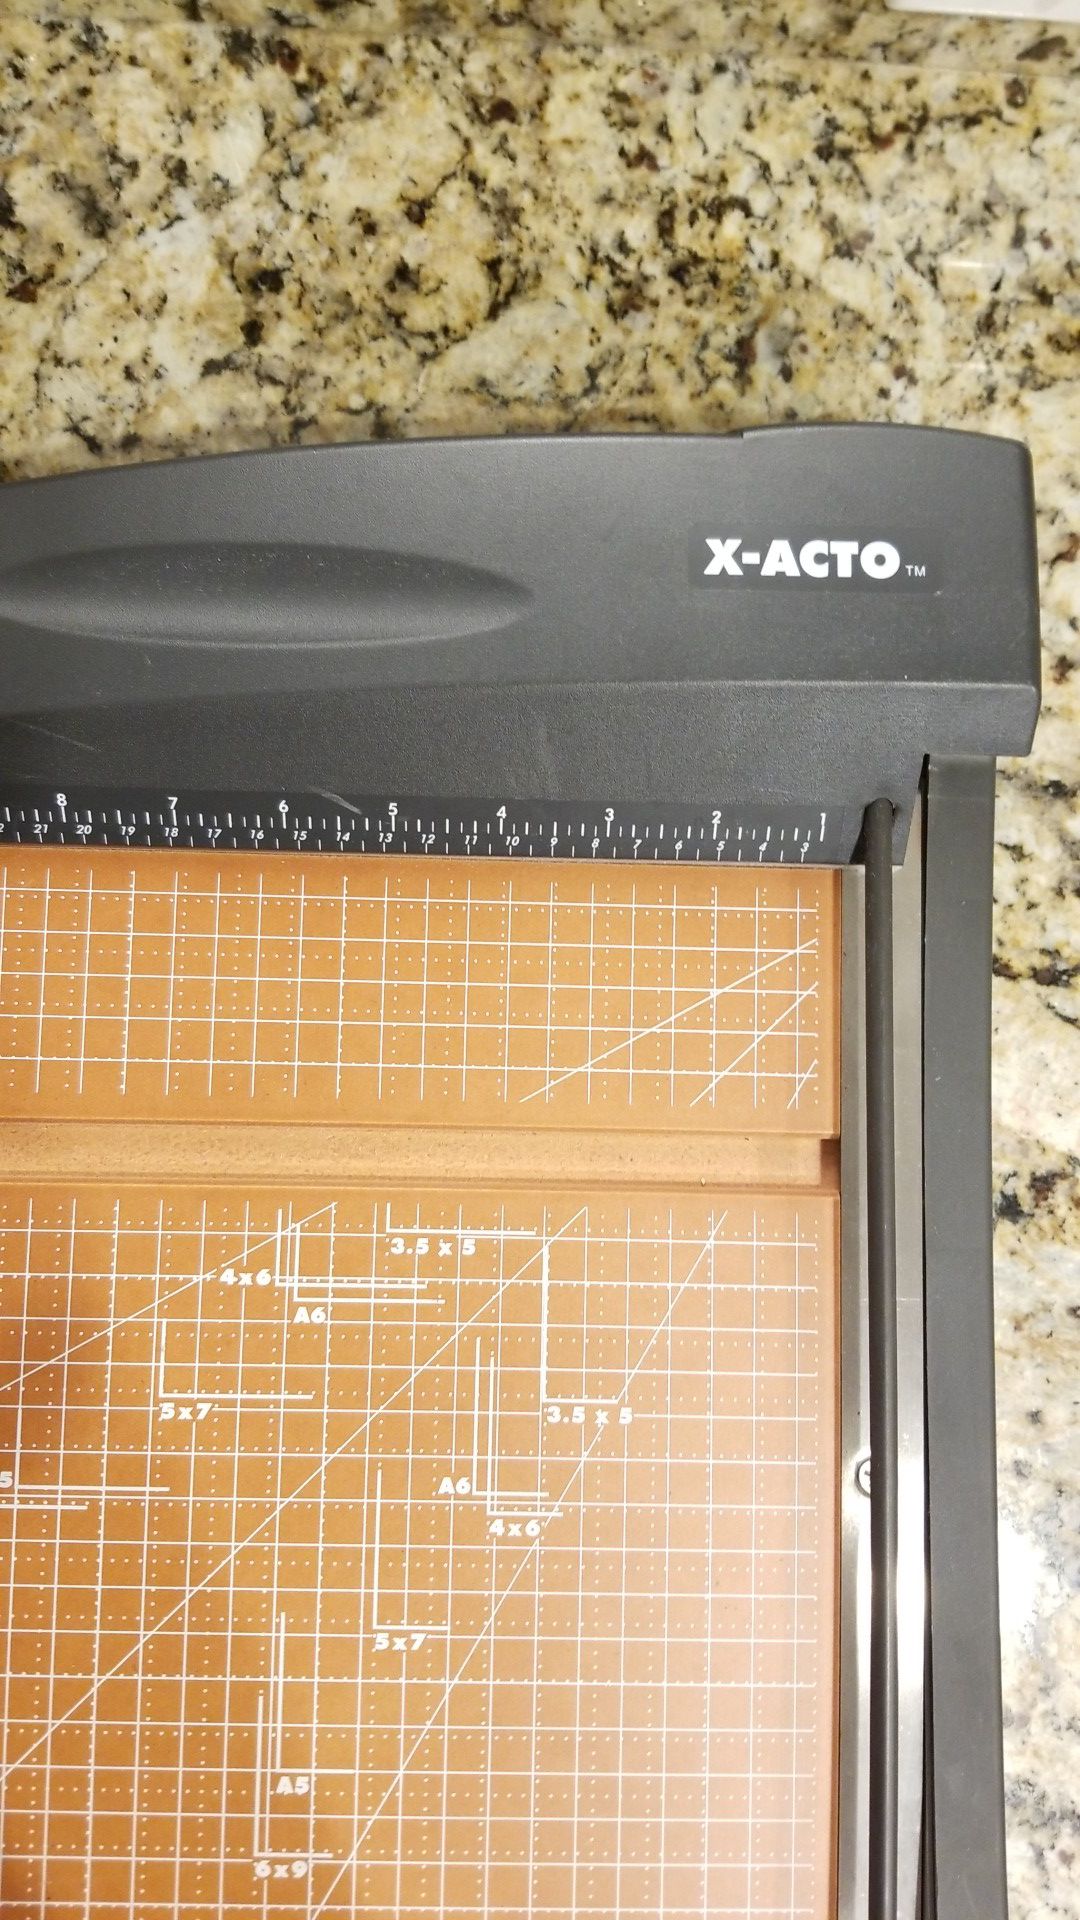 X- acto paper cutter